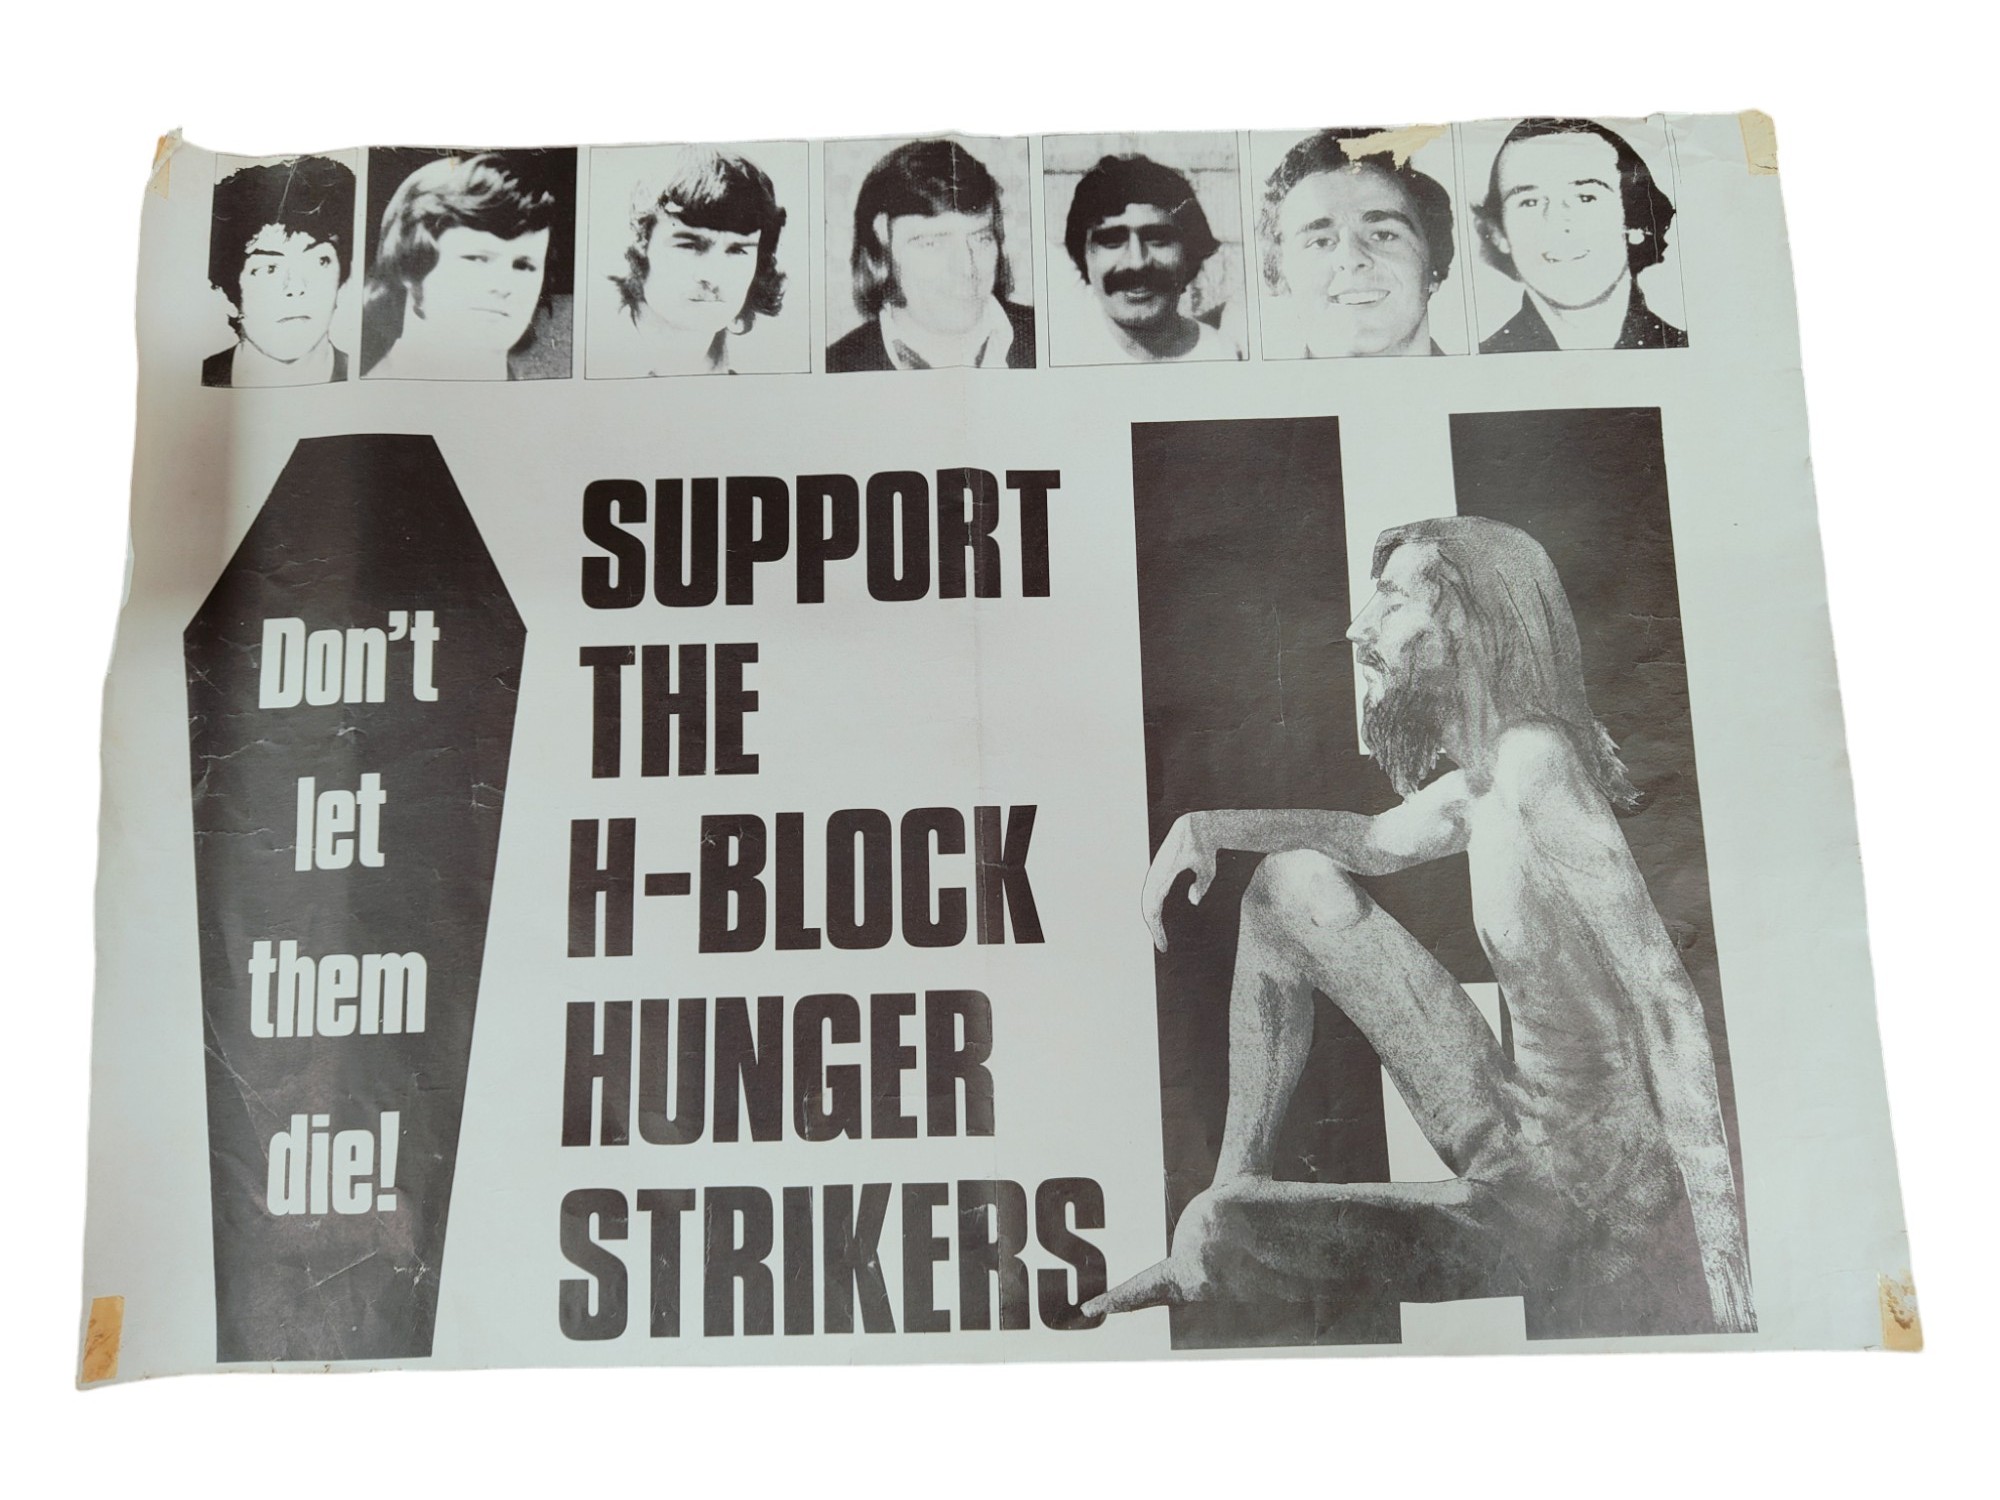 REPUBLICAN POSTER - SUPPORT THE H-BLOCK HUNGER STRIKERS